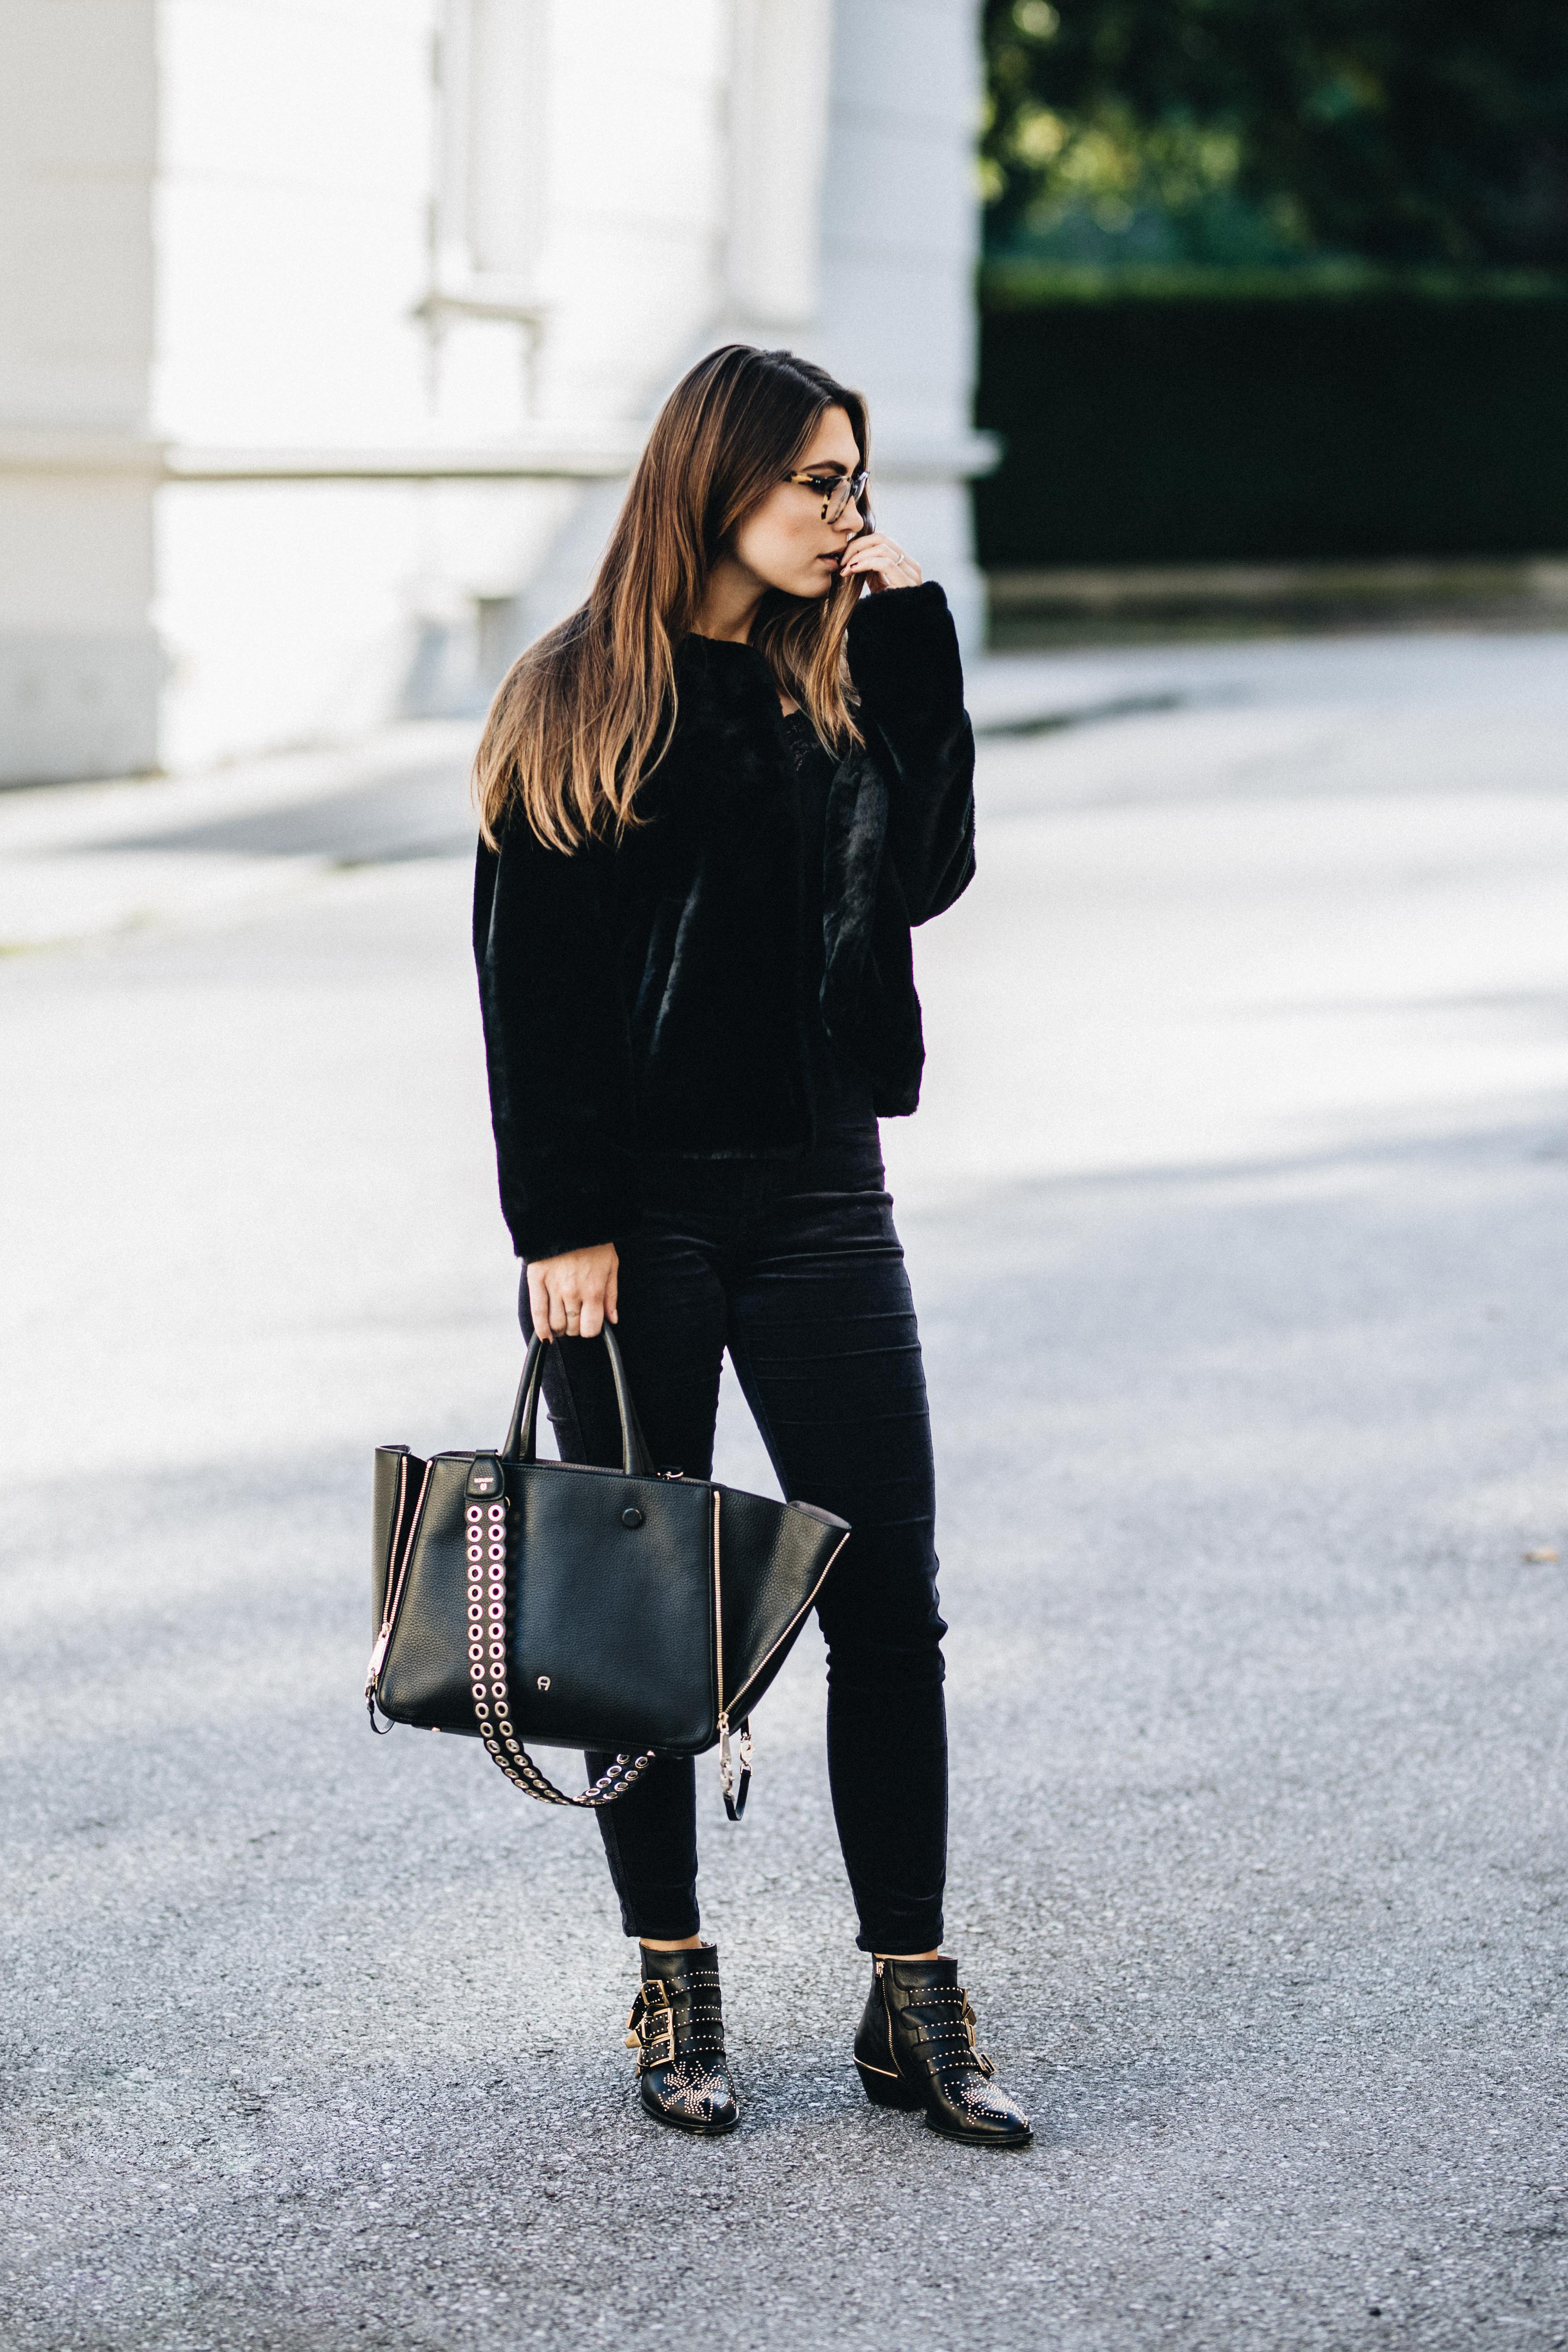 Outfit: How to wear black from head to toe without looking boring | You rock my life